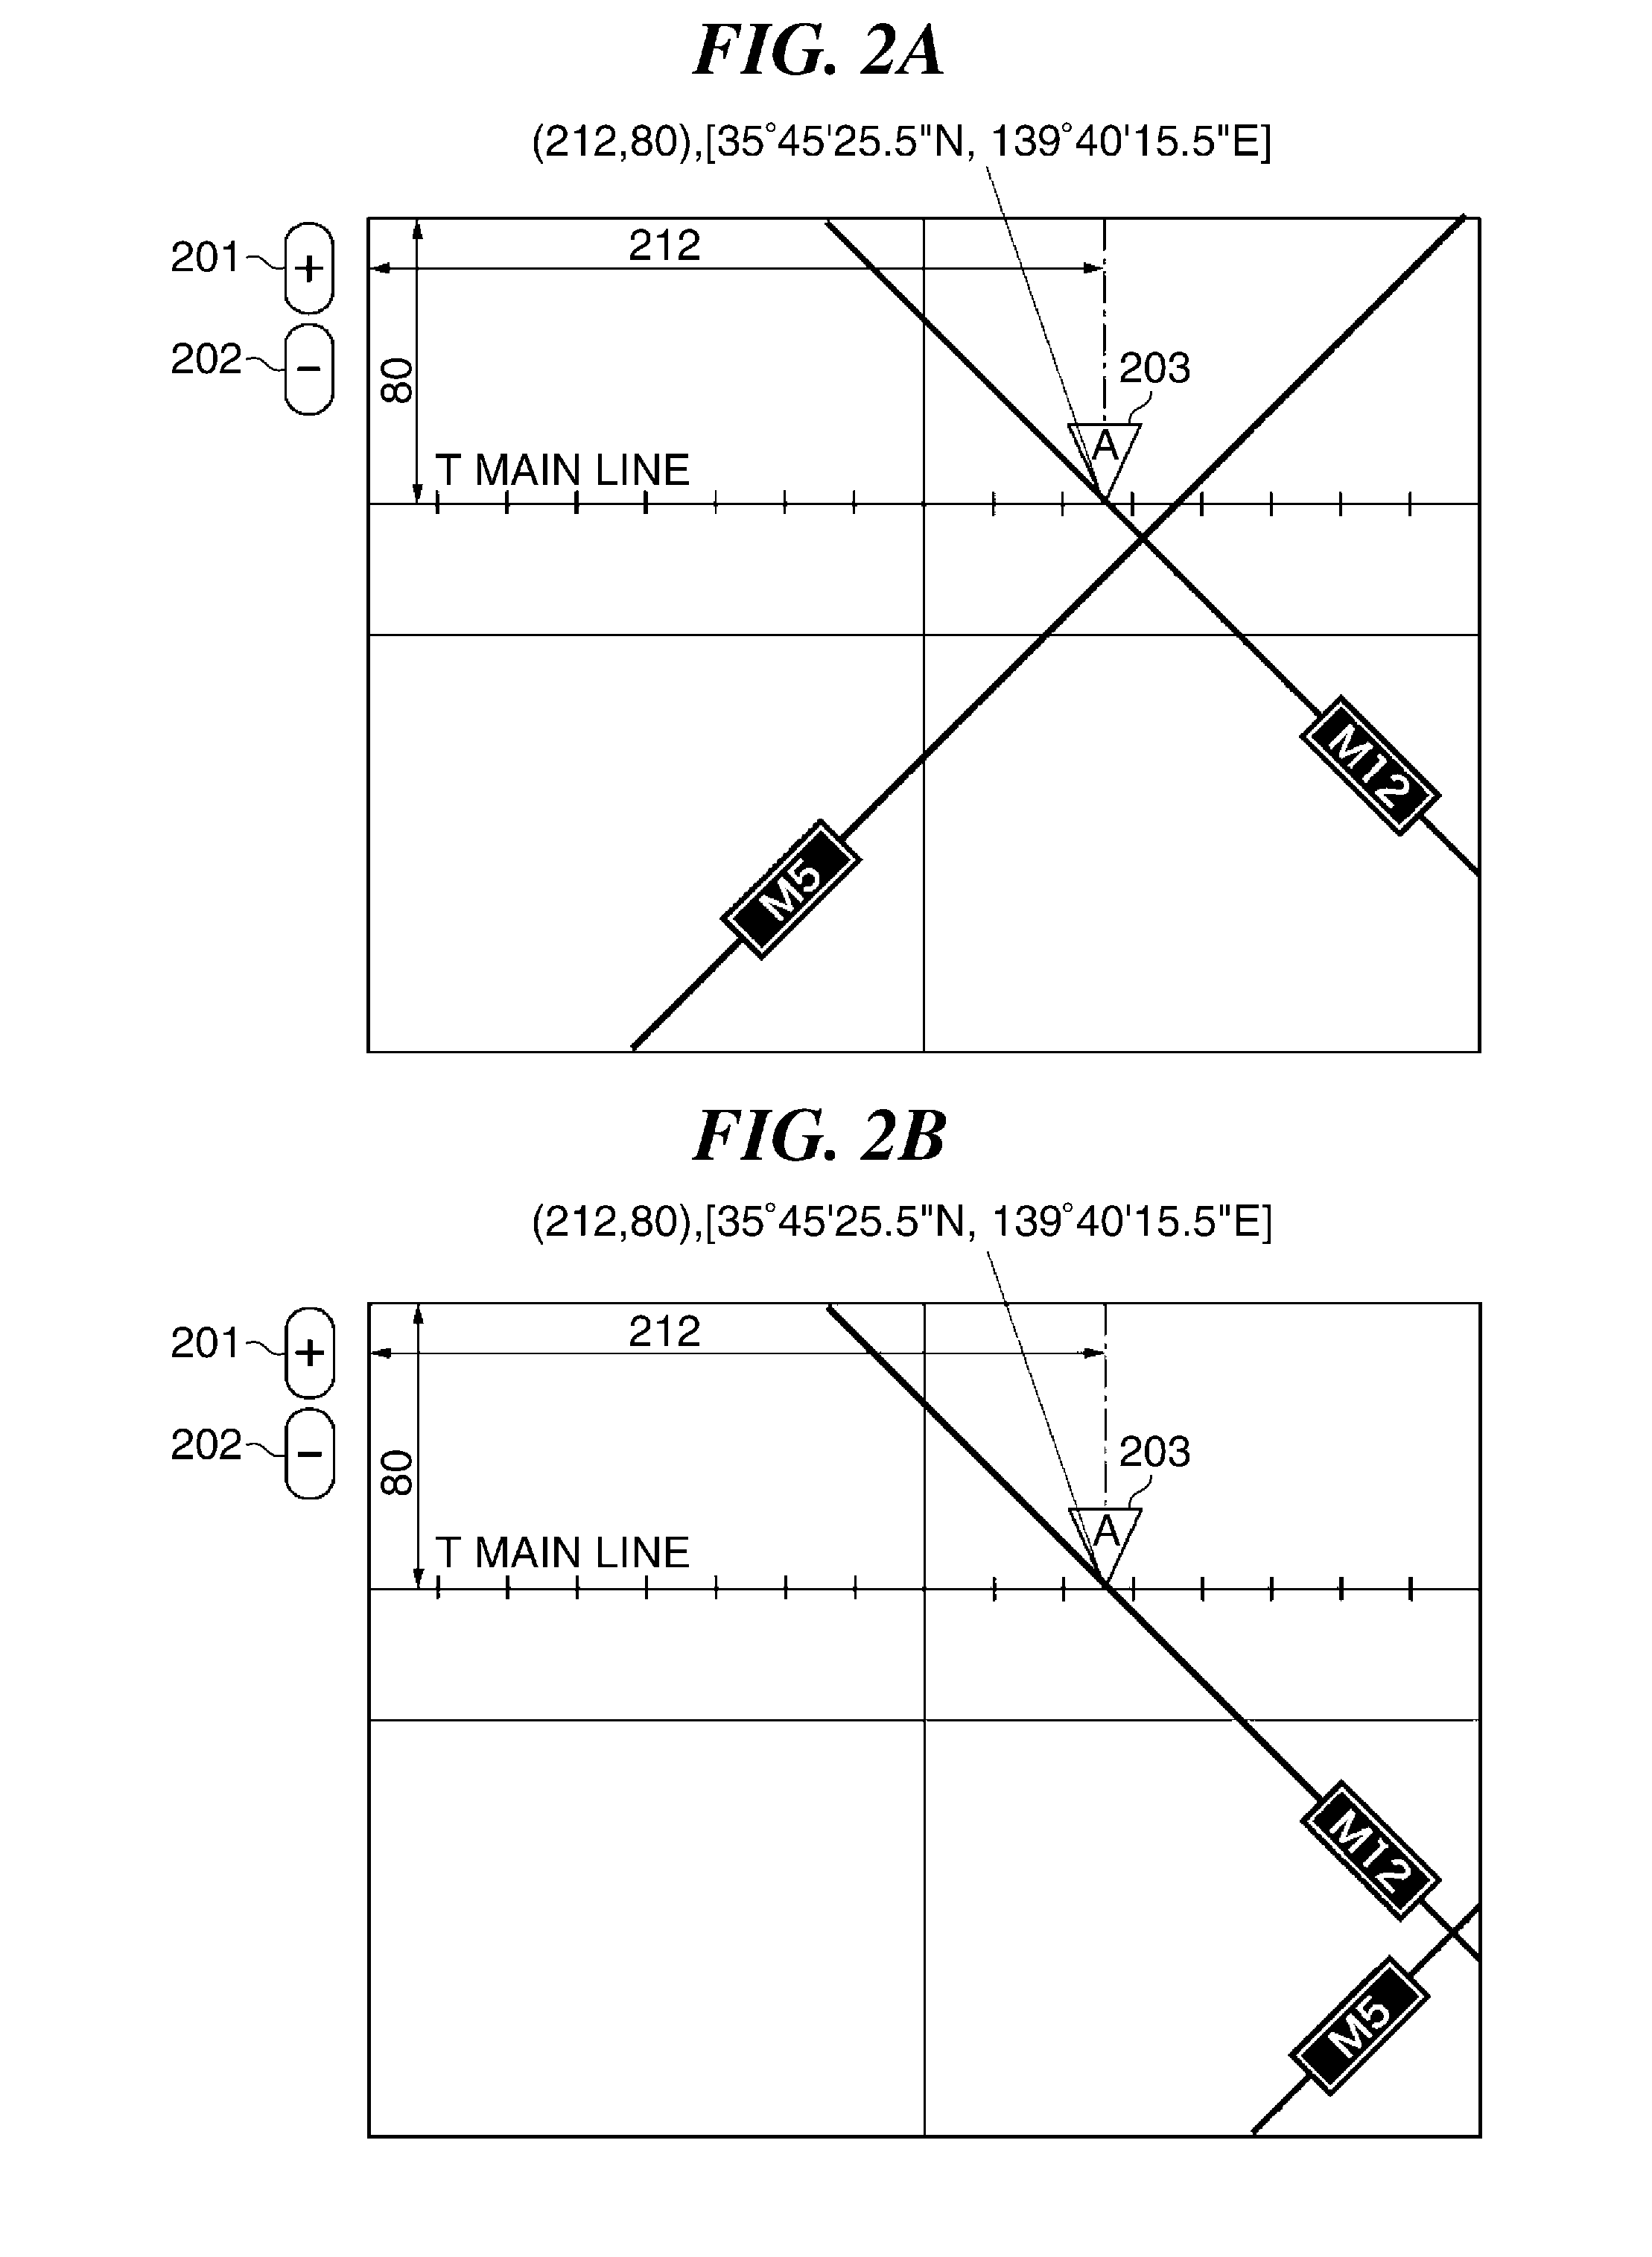 Display control apparatus capable of placing objects on screen according to position attributes of the objects, control method therefor, and storage medium